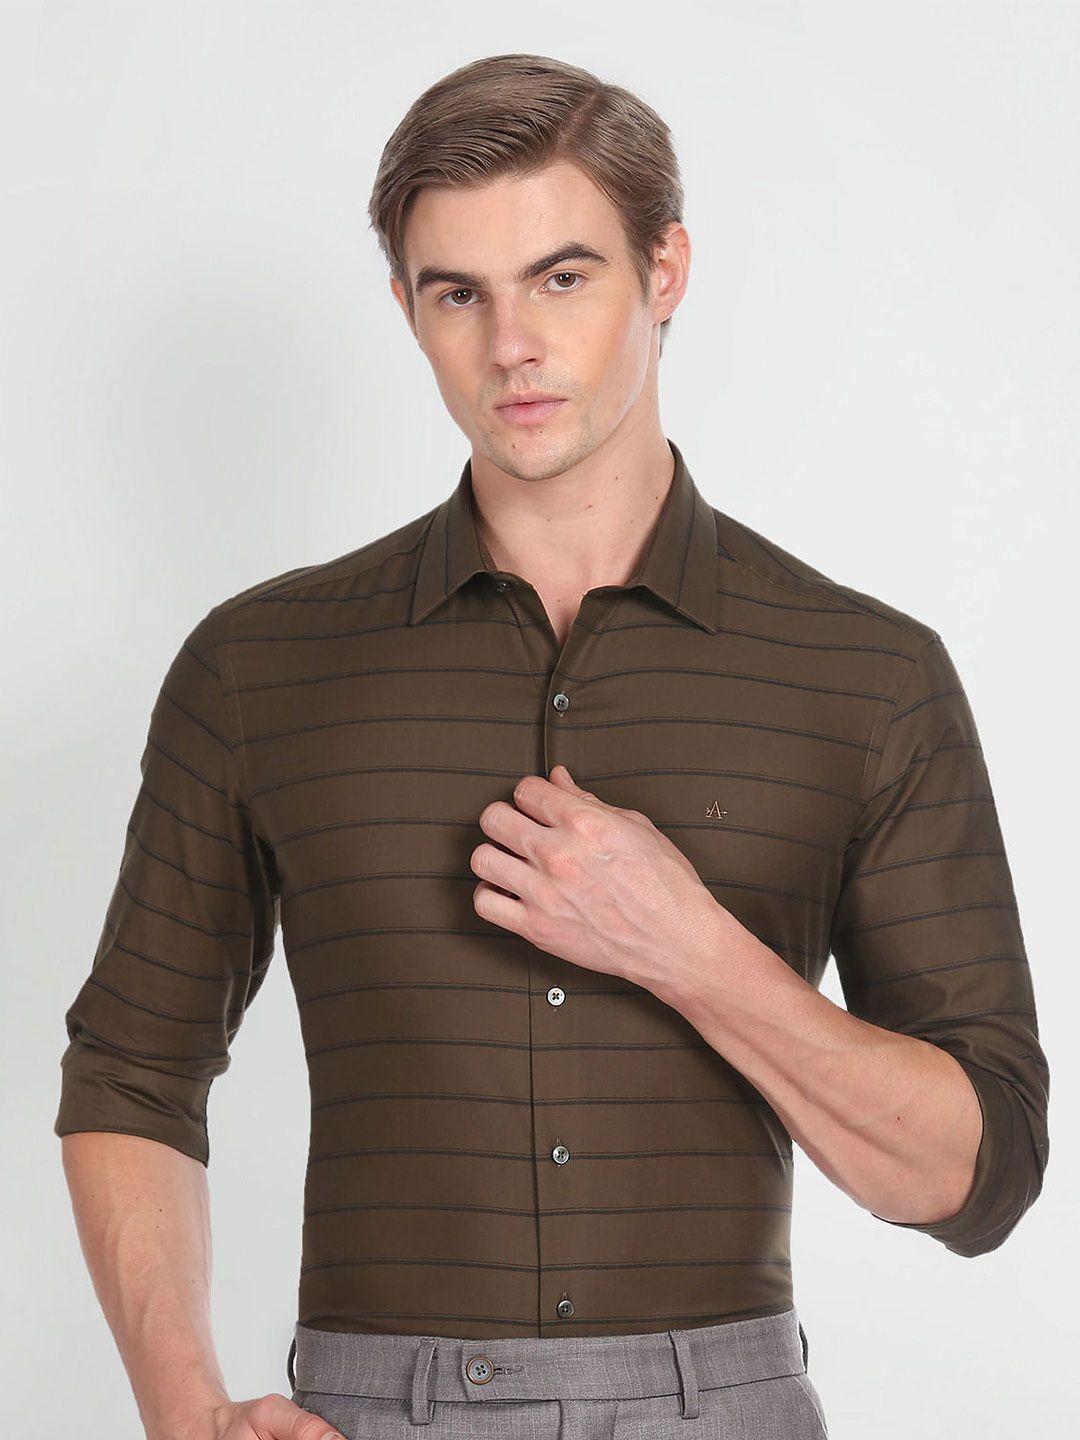 arrow new york slim fit horizontal stripes twill weave opaque pure cotton casual shirt